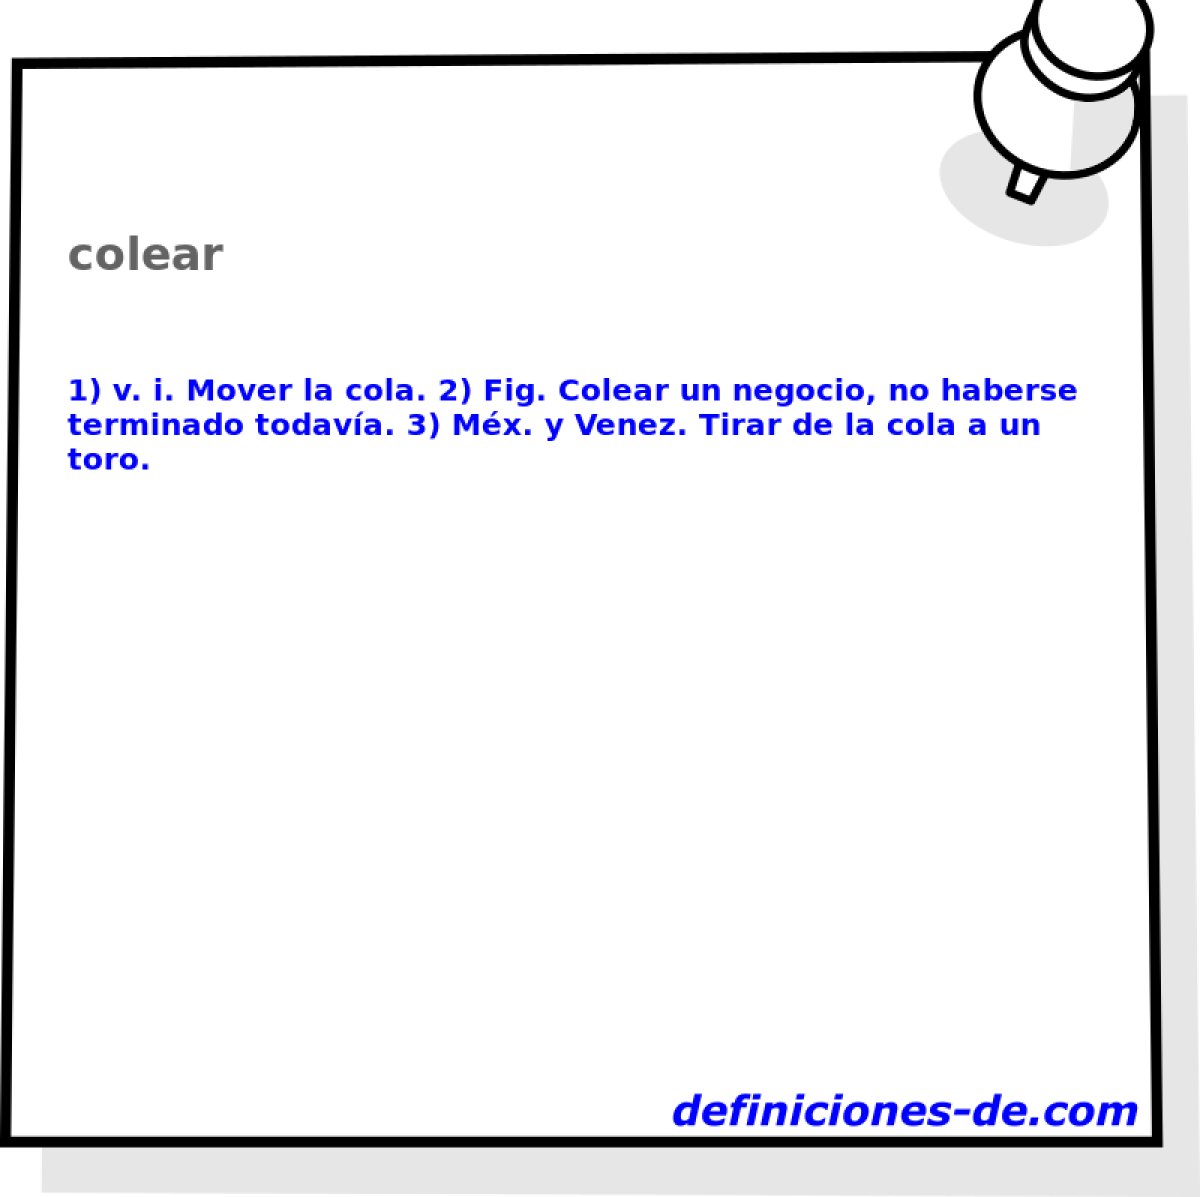 colear 